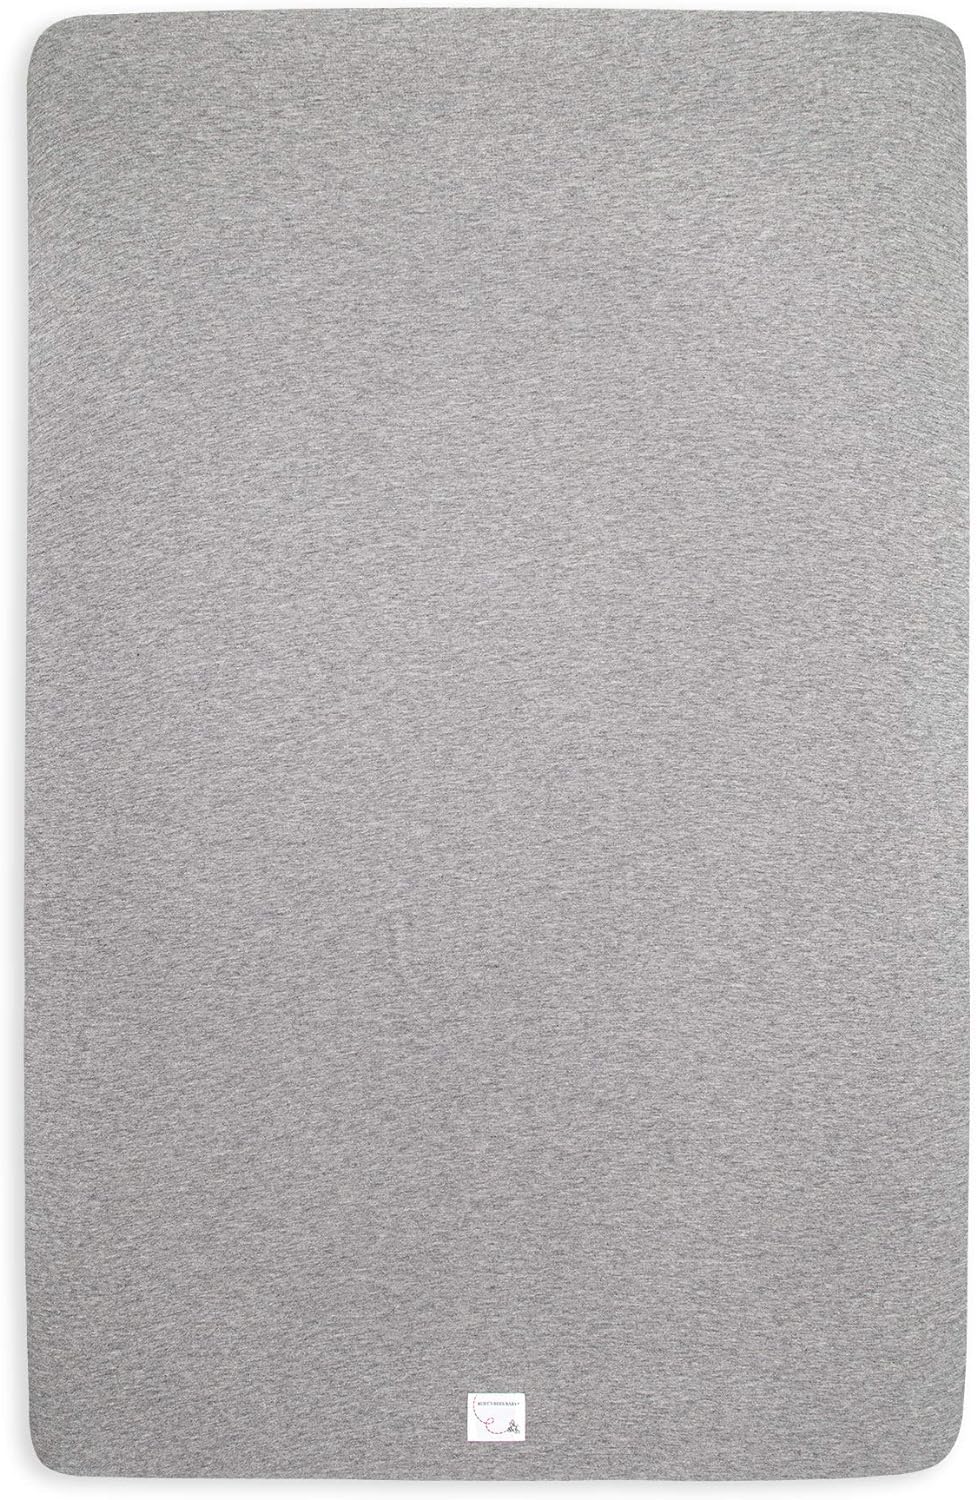 Burt's Bees Baby - Fitted Crib Sheet, Solid Color, 100% Organic Cotton Crib Sheet for Standard Crib and Toddler Mattresses (Heather Grey) , 28x52 Inch (Pack of 1)